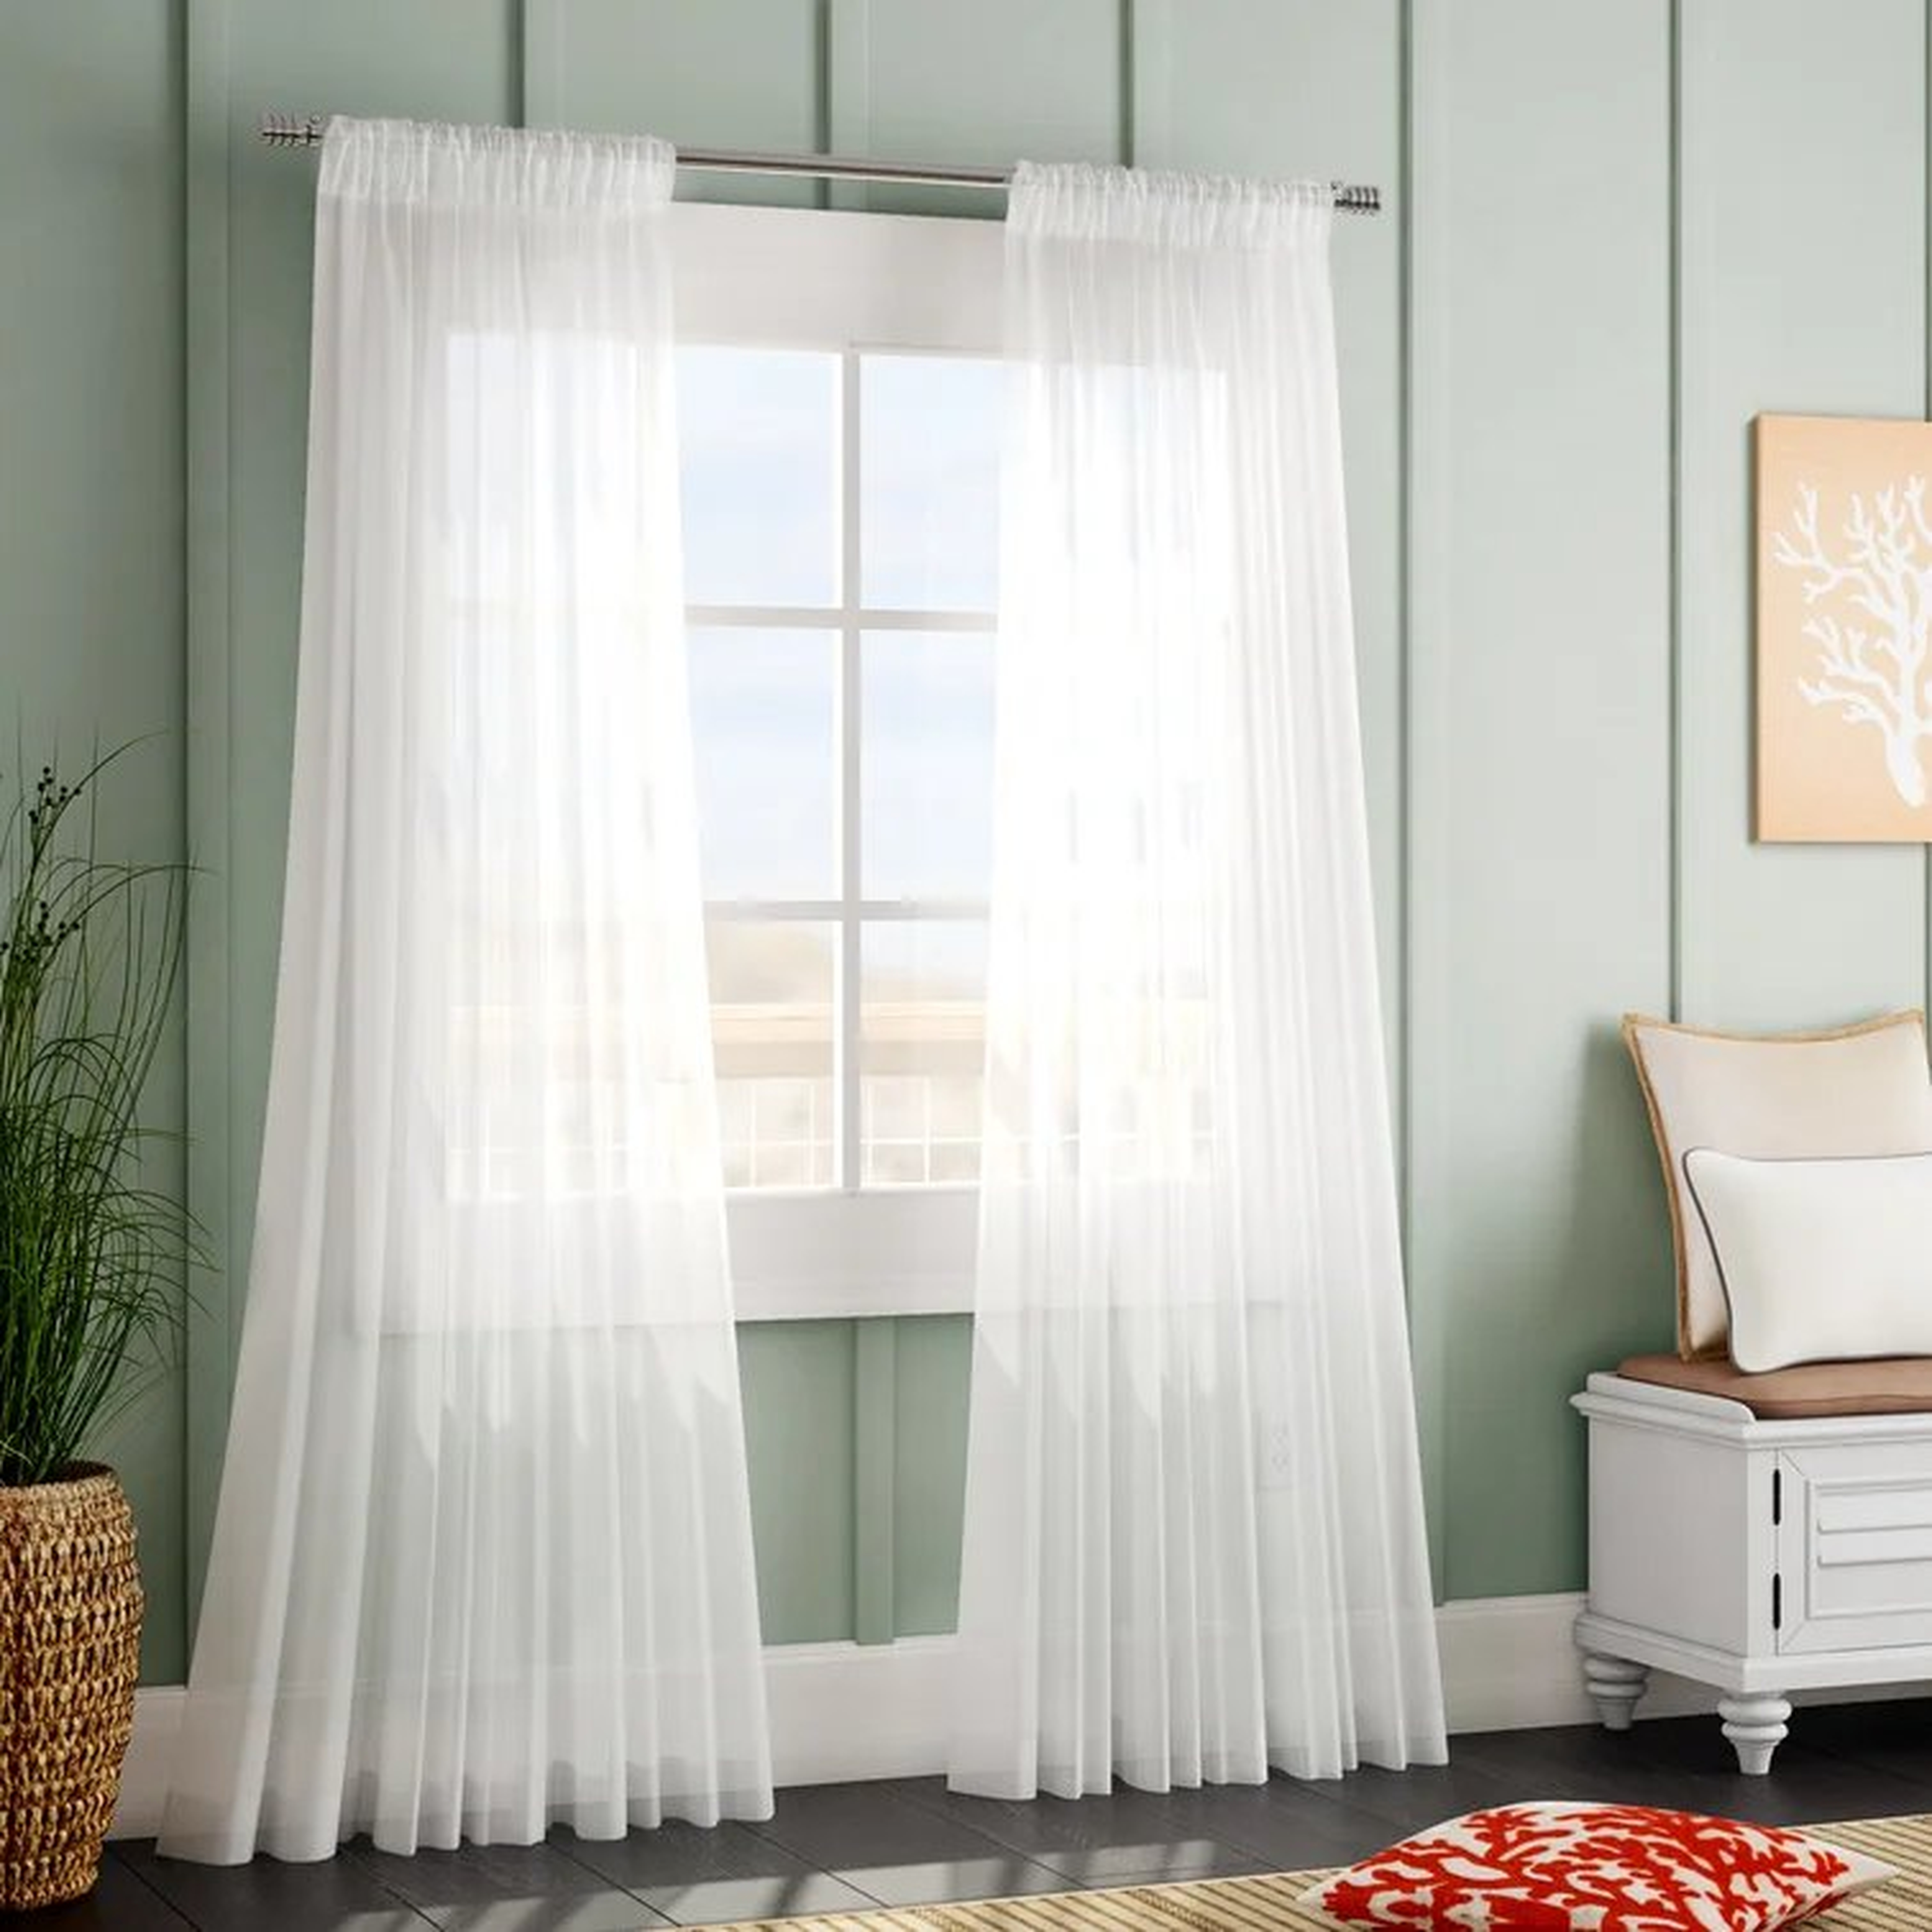 Apollo Extra Wide Voile Sheer Curtains for Bedroom Double Layered Curtains for Large Window Single Panel - Wayfair